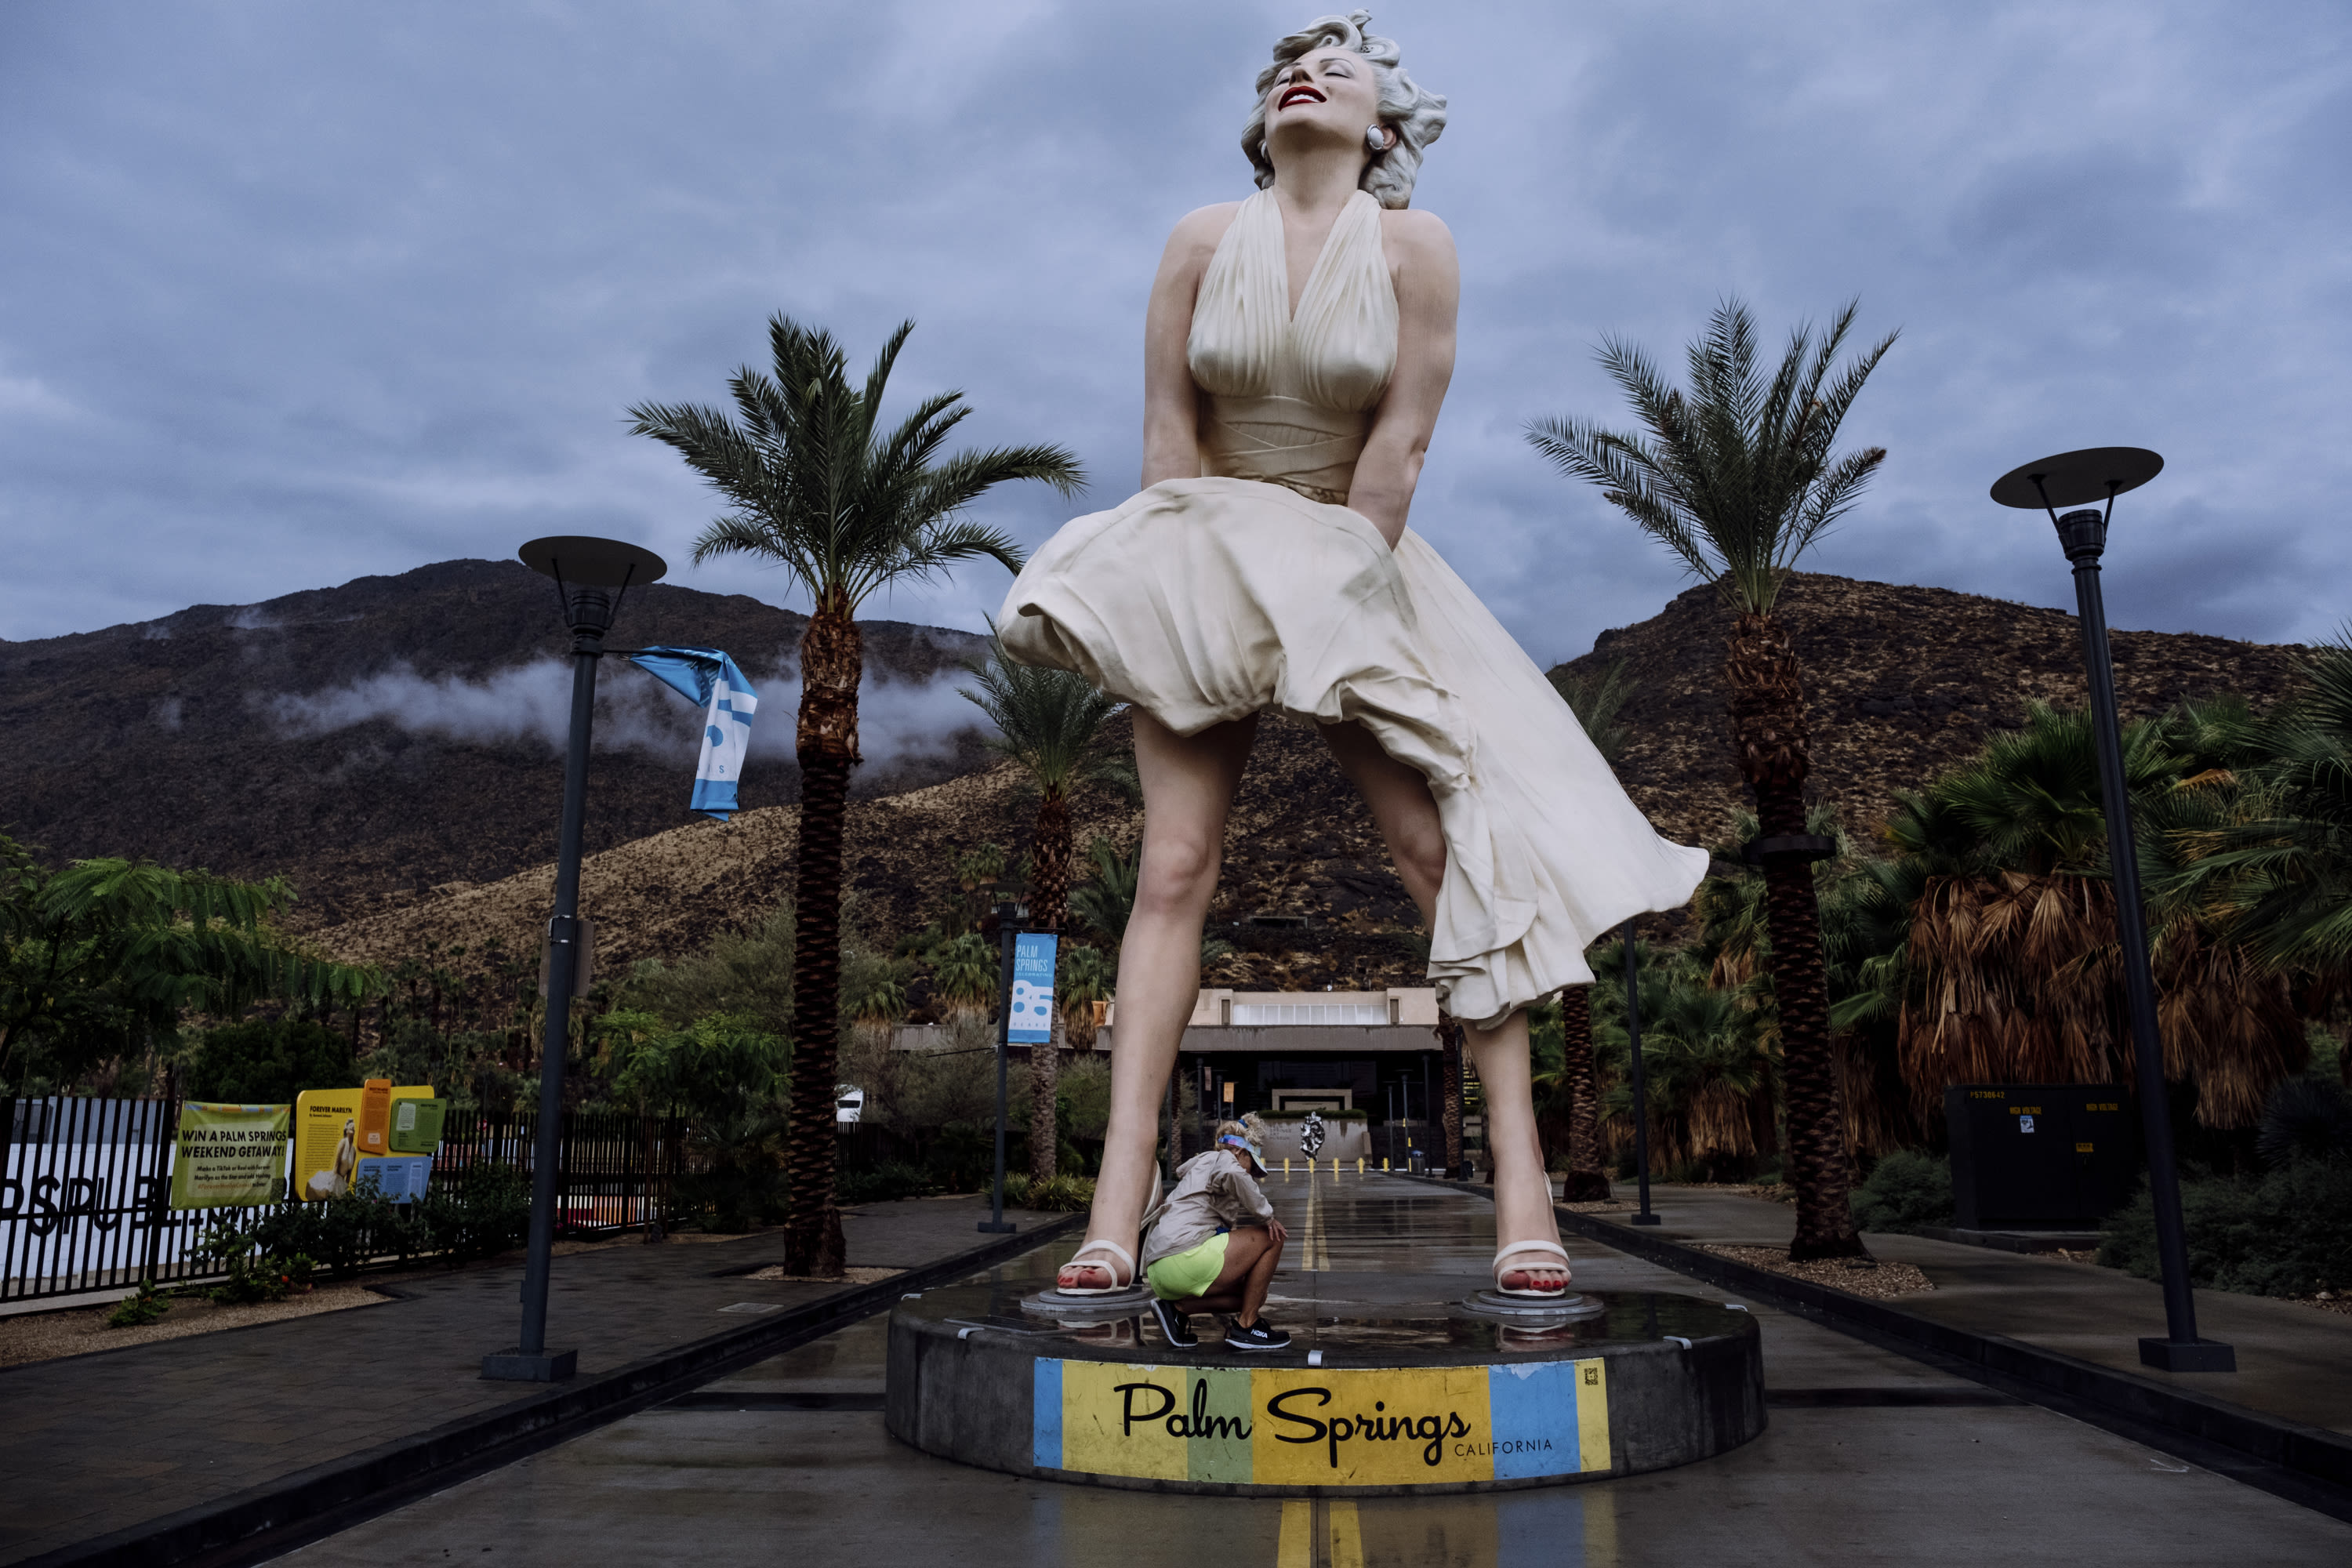 Icon or Eyesore? Palm Springs to Move Divisive Marilyn Monroe Statue